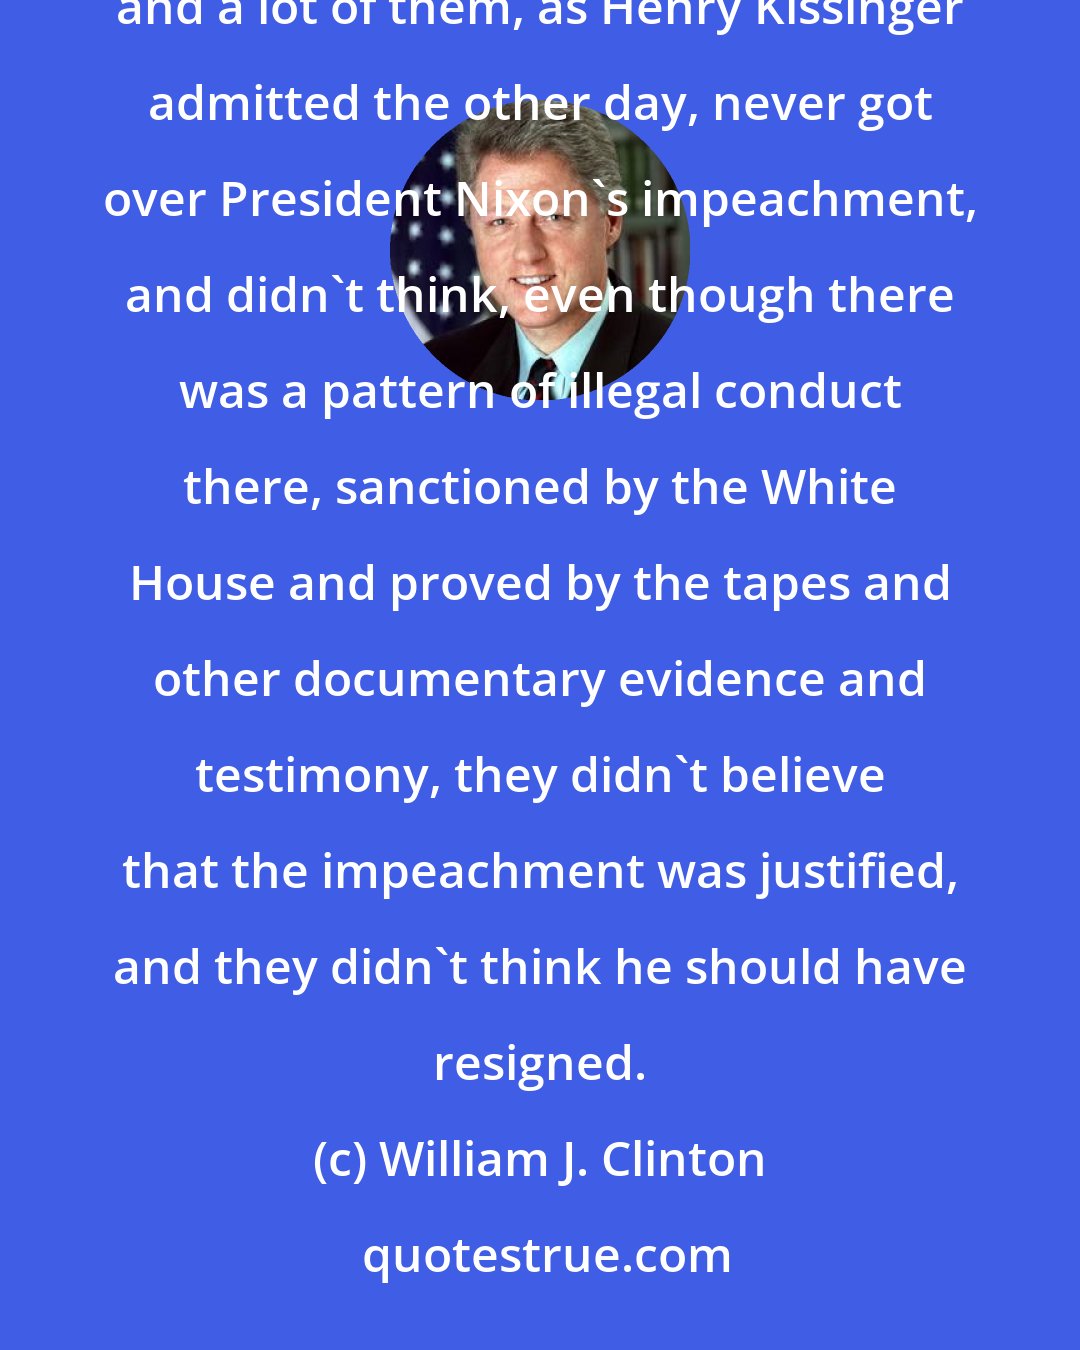 William J. Clinton: I think the Republicans and conservatives generally were alienated by America's unsuccessful effort in Vietnam, and a lot of them, as Henry Kissinger admitted the other day, never got over President Nixon's impeachment, and didn't think, even though there was a pattern of illegal conduct there, sanctioned by the White House and proved by the tapes and other documentary evidence and testimony, they didn't believe that the impeachment was justified, and they didn't think he should have resigned.